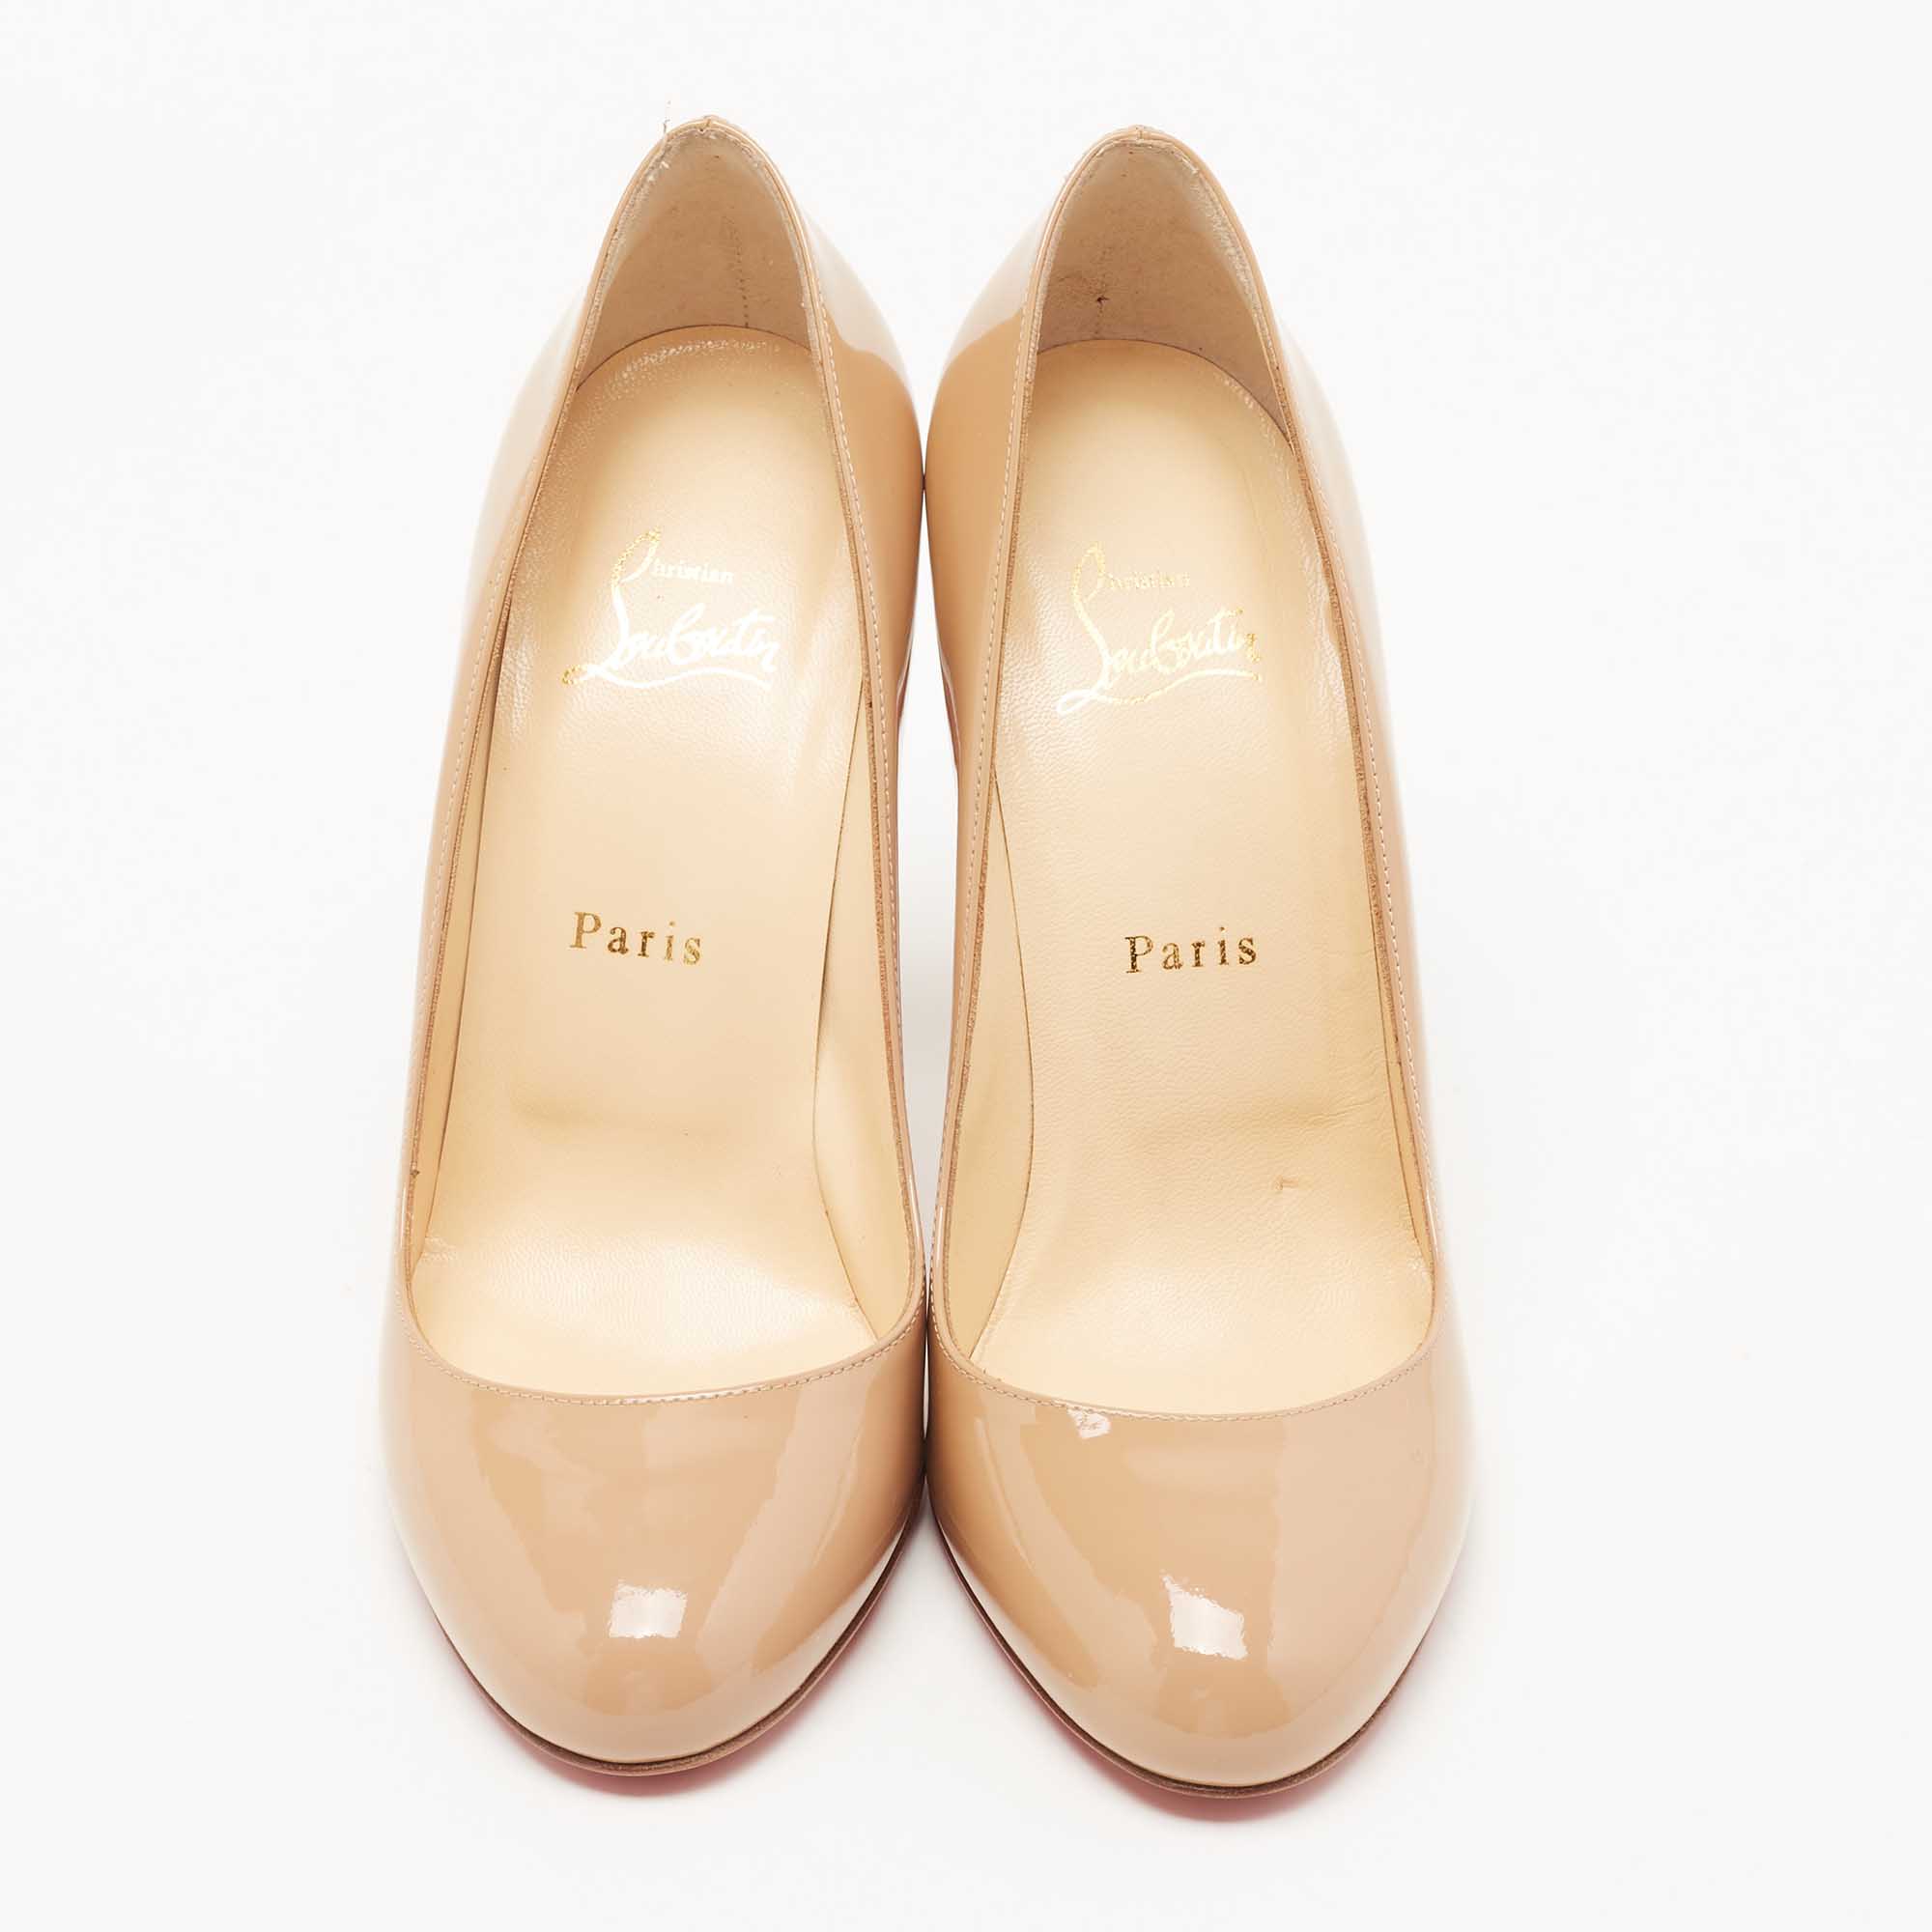 Christian Louboutin Beige Patent Leather FiFifa Round Toe Pumps Size 39